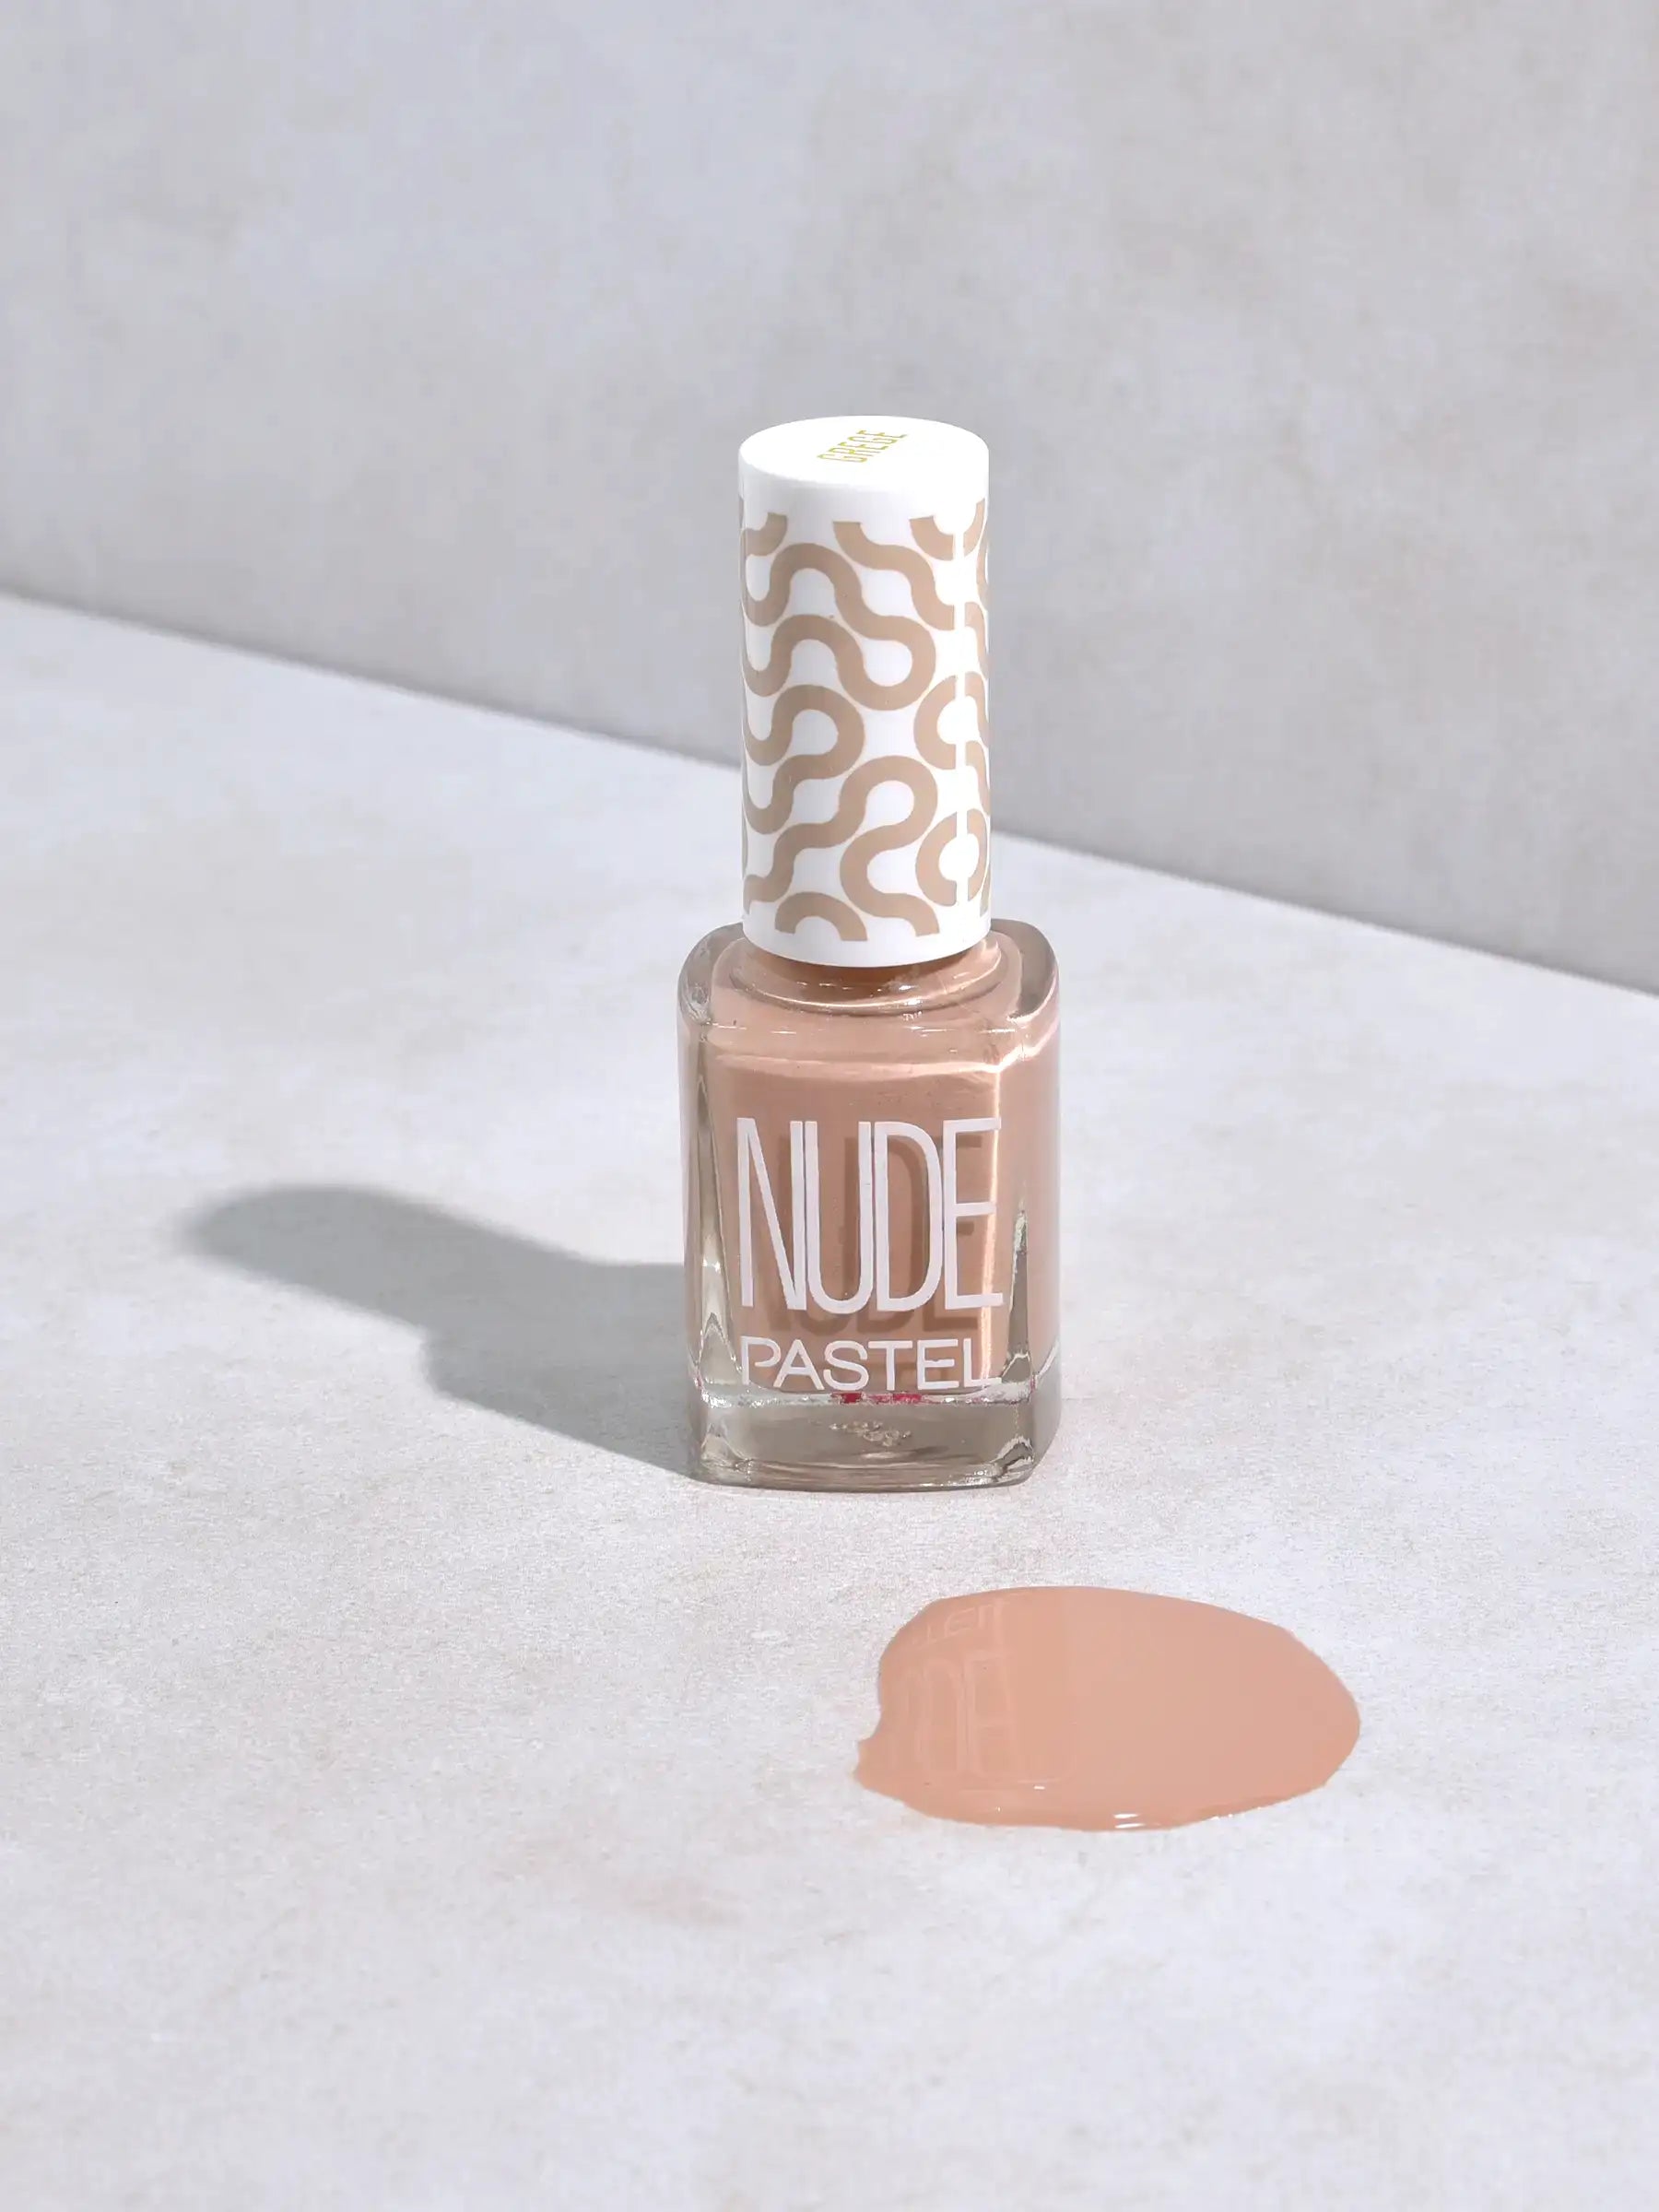 NUDE BY PASTEL NAIL POLISH 757 GREGE